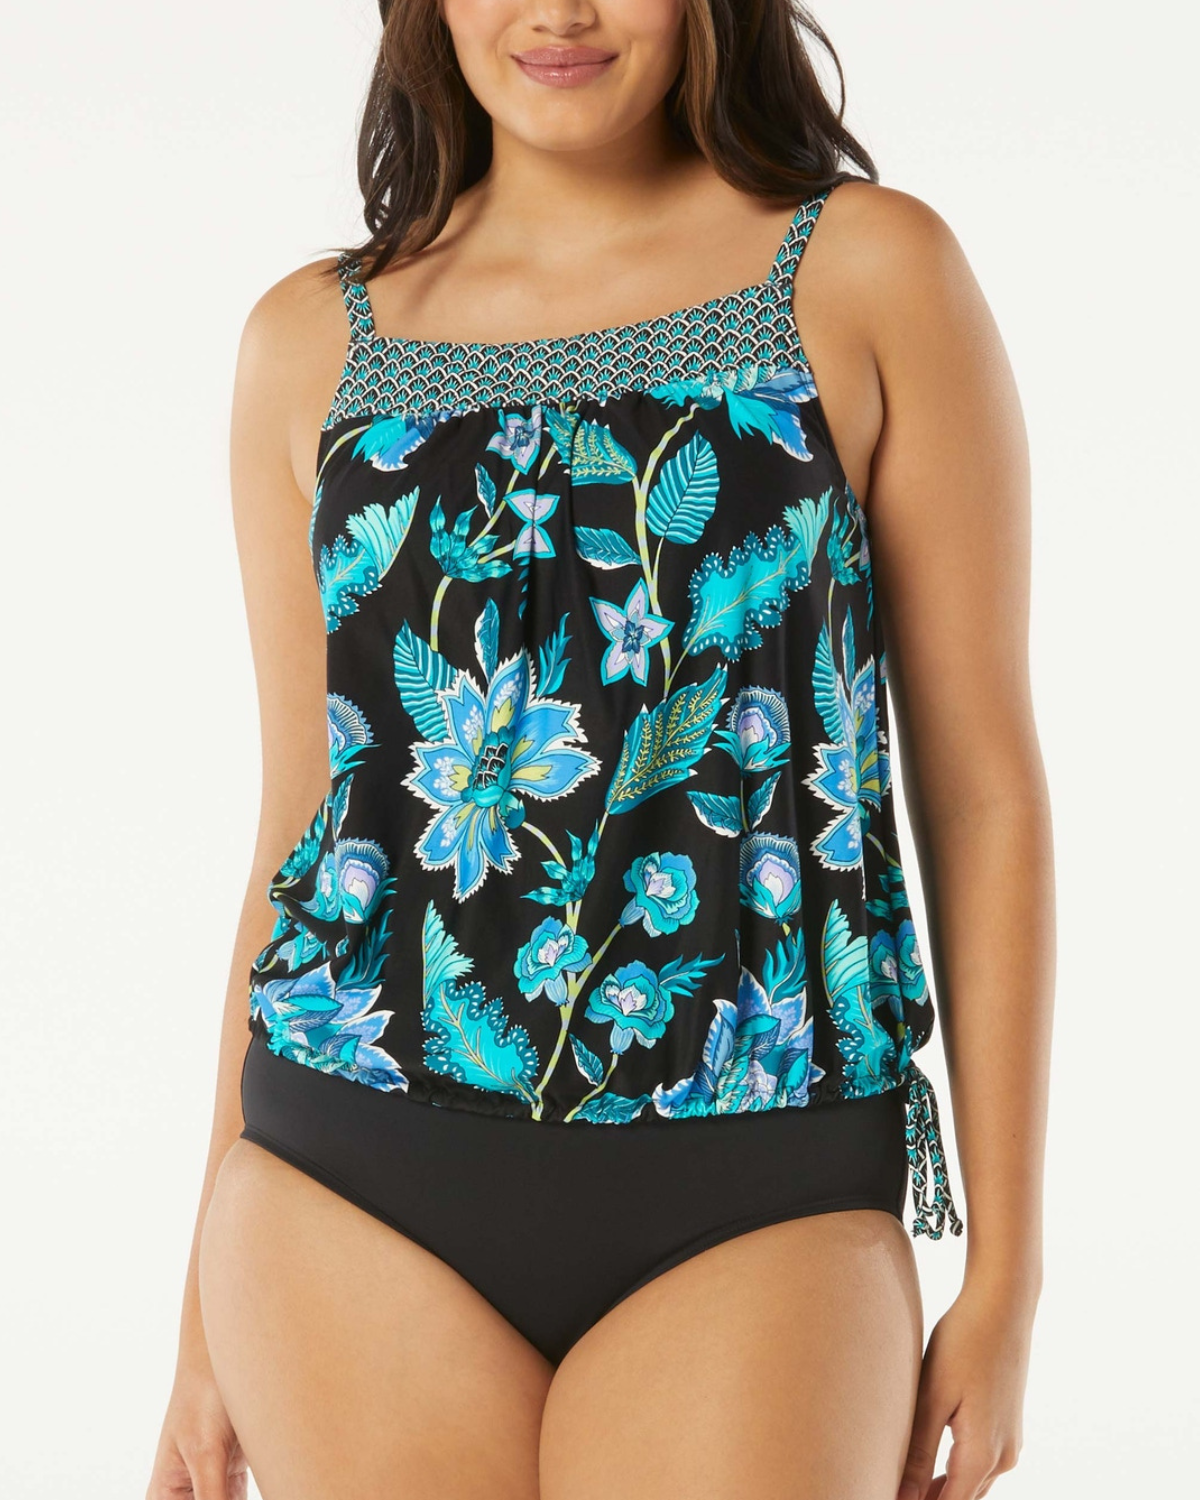 Model wearing a blouson tankini top with a floral print in black, blue and green